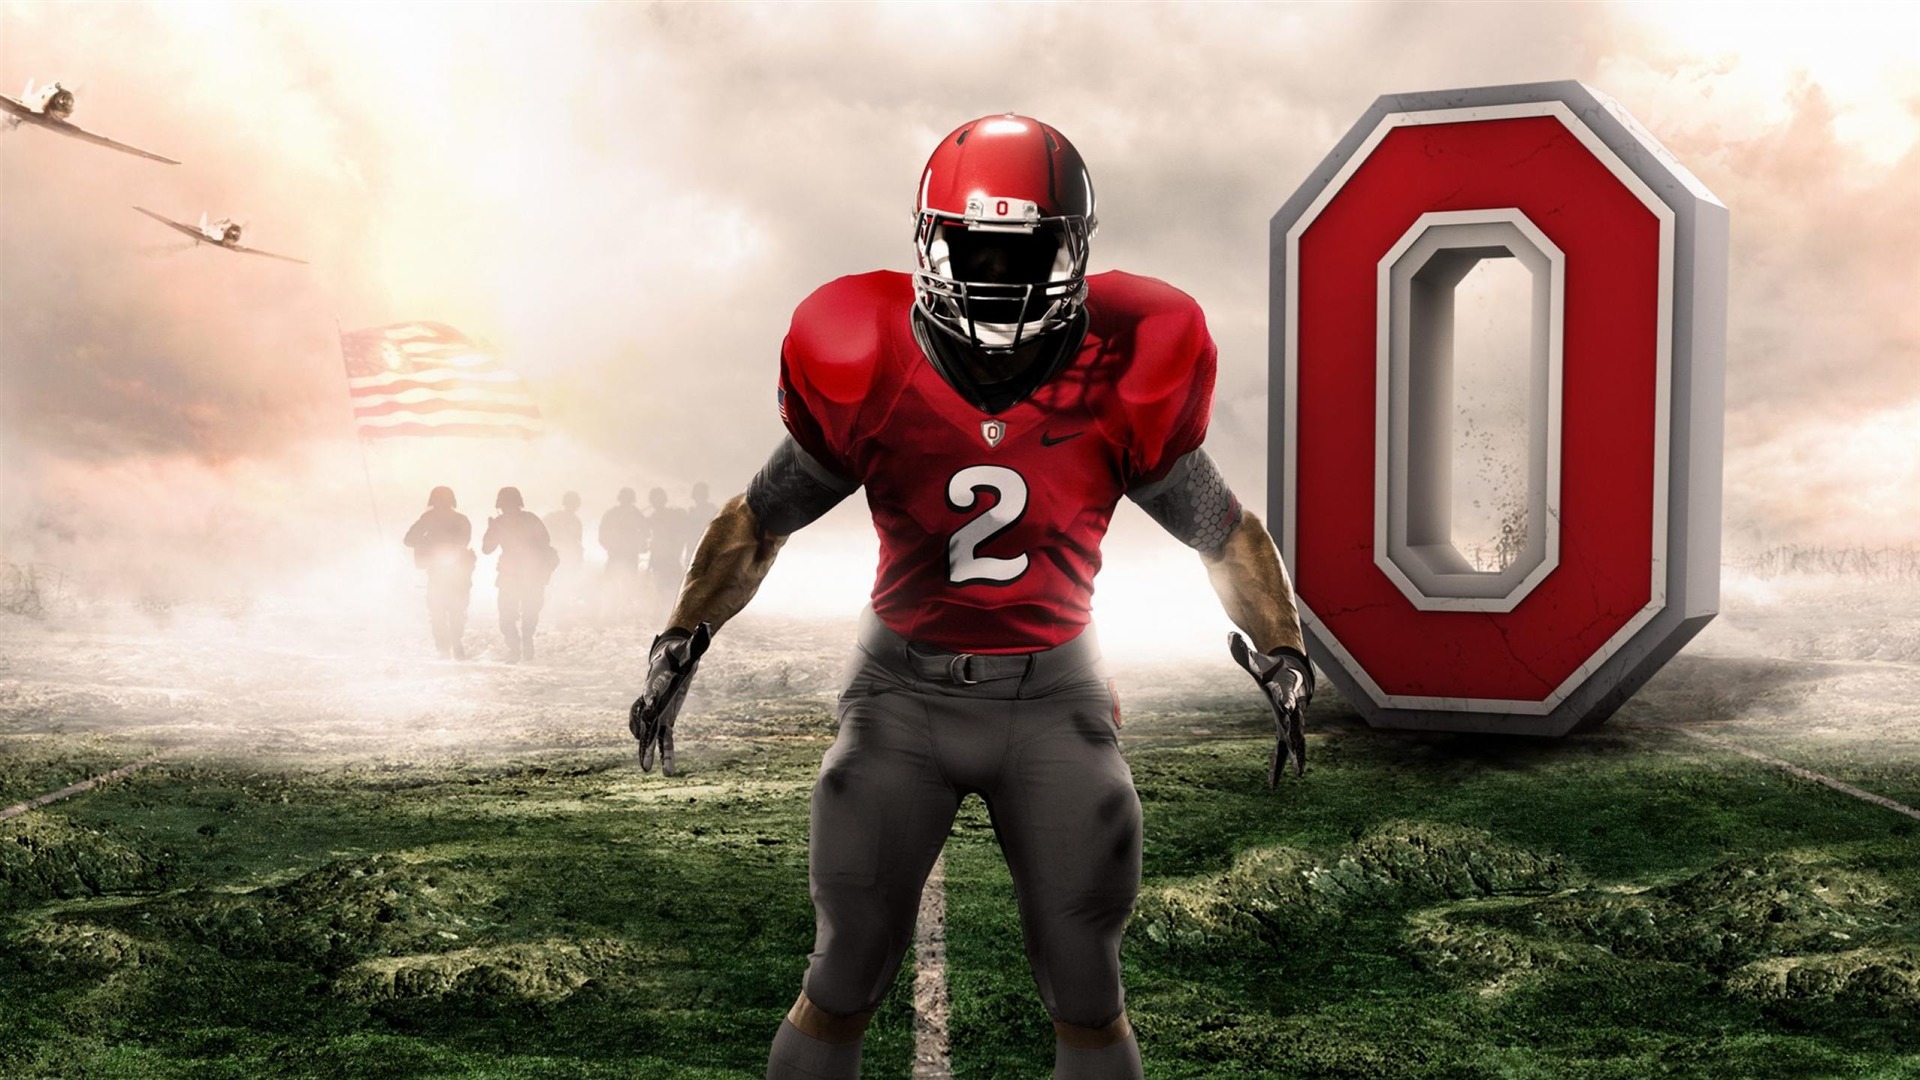 Ohio State Football Wallpapers - Ohio State Football Players Background , HD Wallpaper & Backgrounds